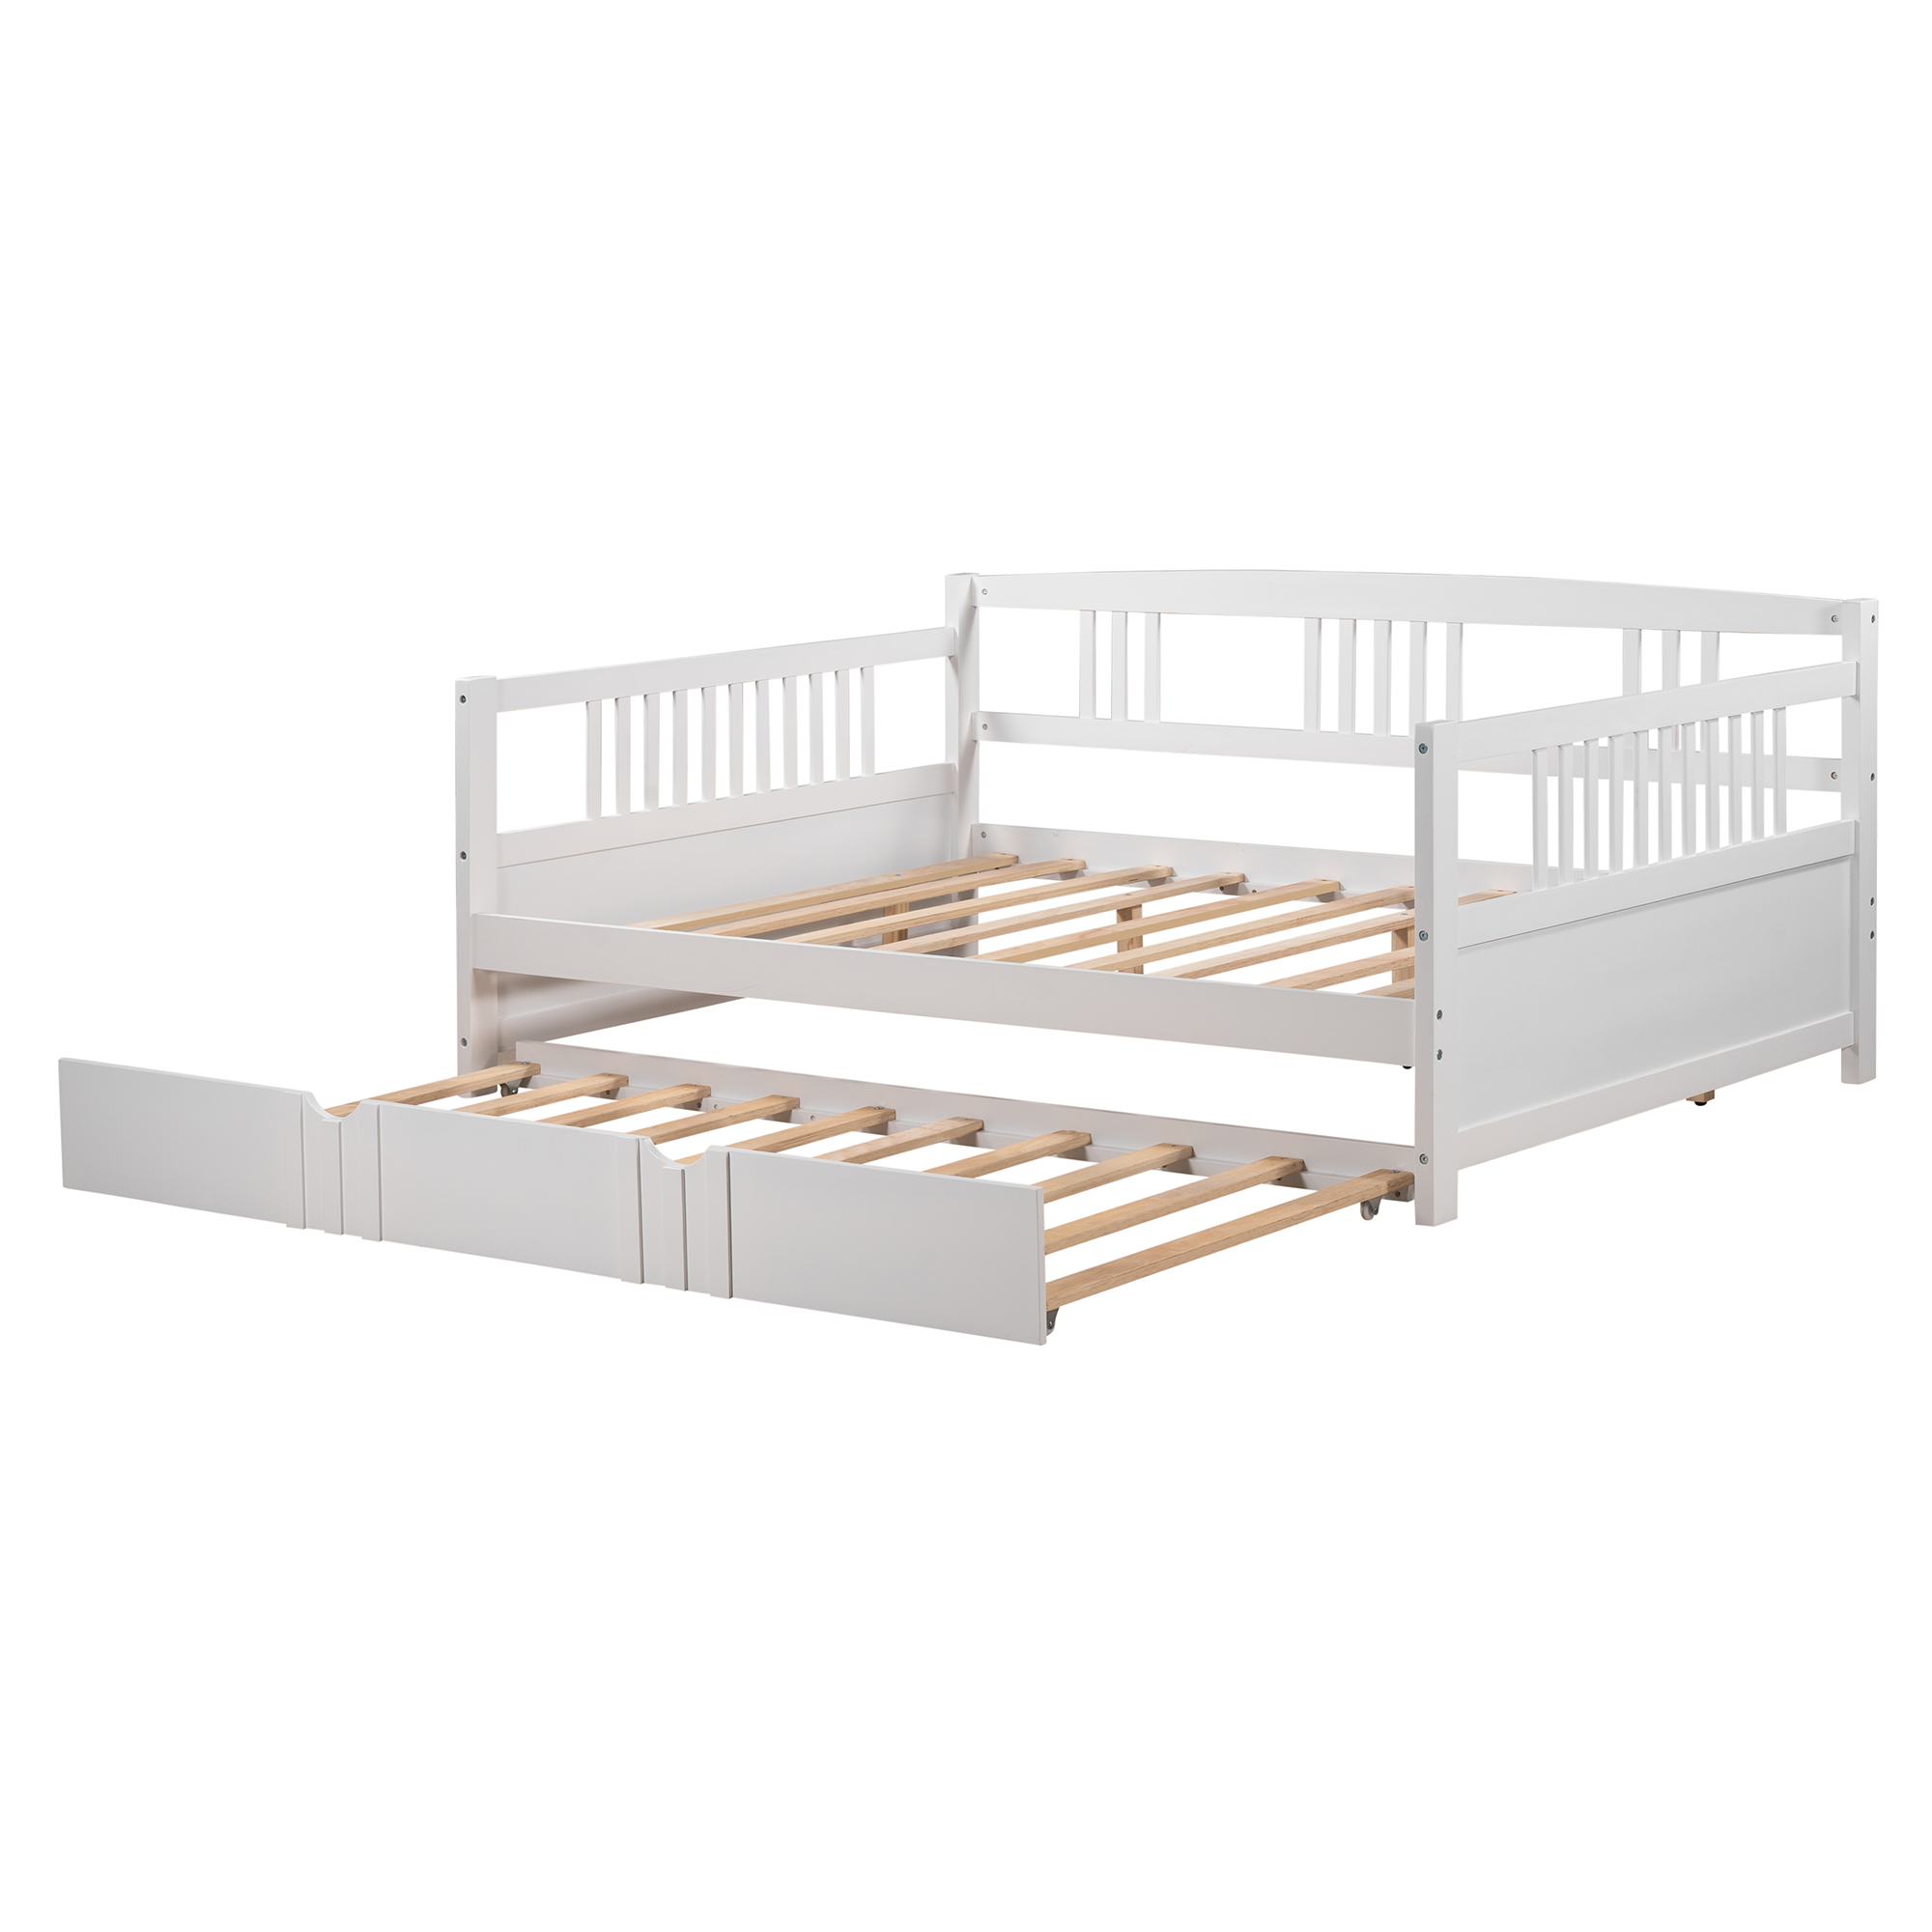 PAPROOS Daybed with Trundle Included, Full Size Daybed Bed Frame with Pull Out Trundle Bed and Wooden Slats, Solid Wood Sofa Bed Full Daybed, No Box Spring Needed, White - image 4 of 12